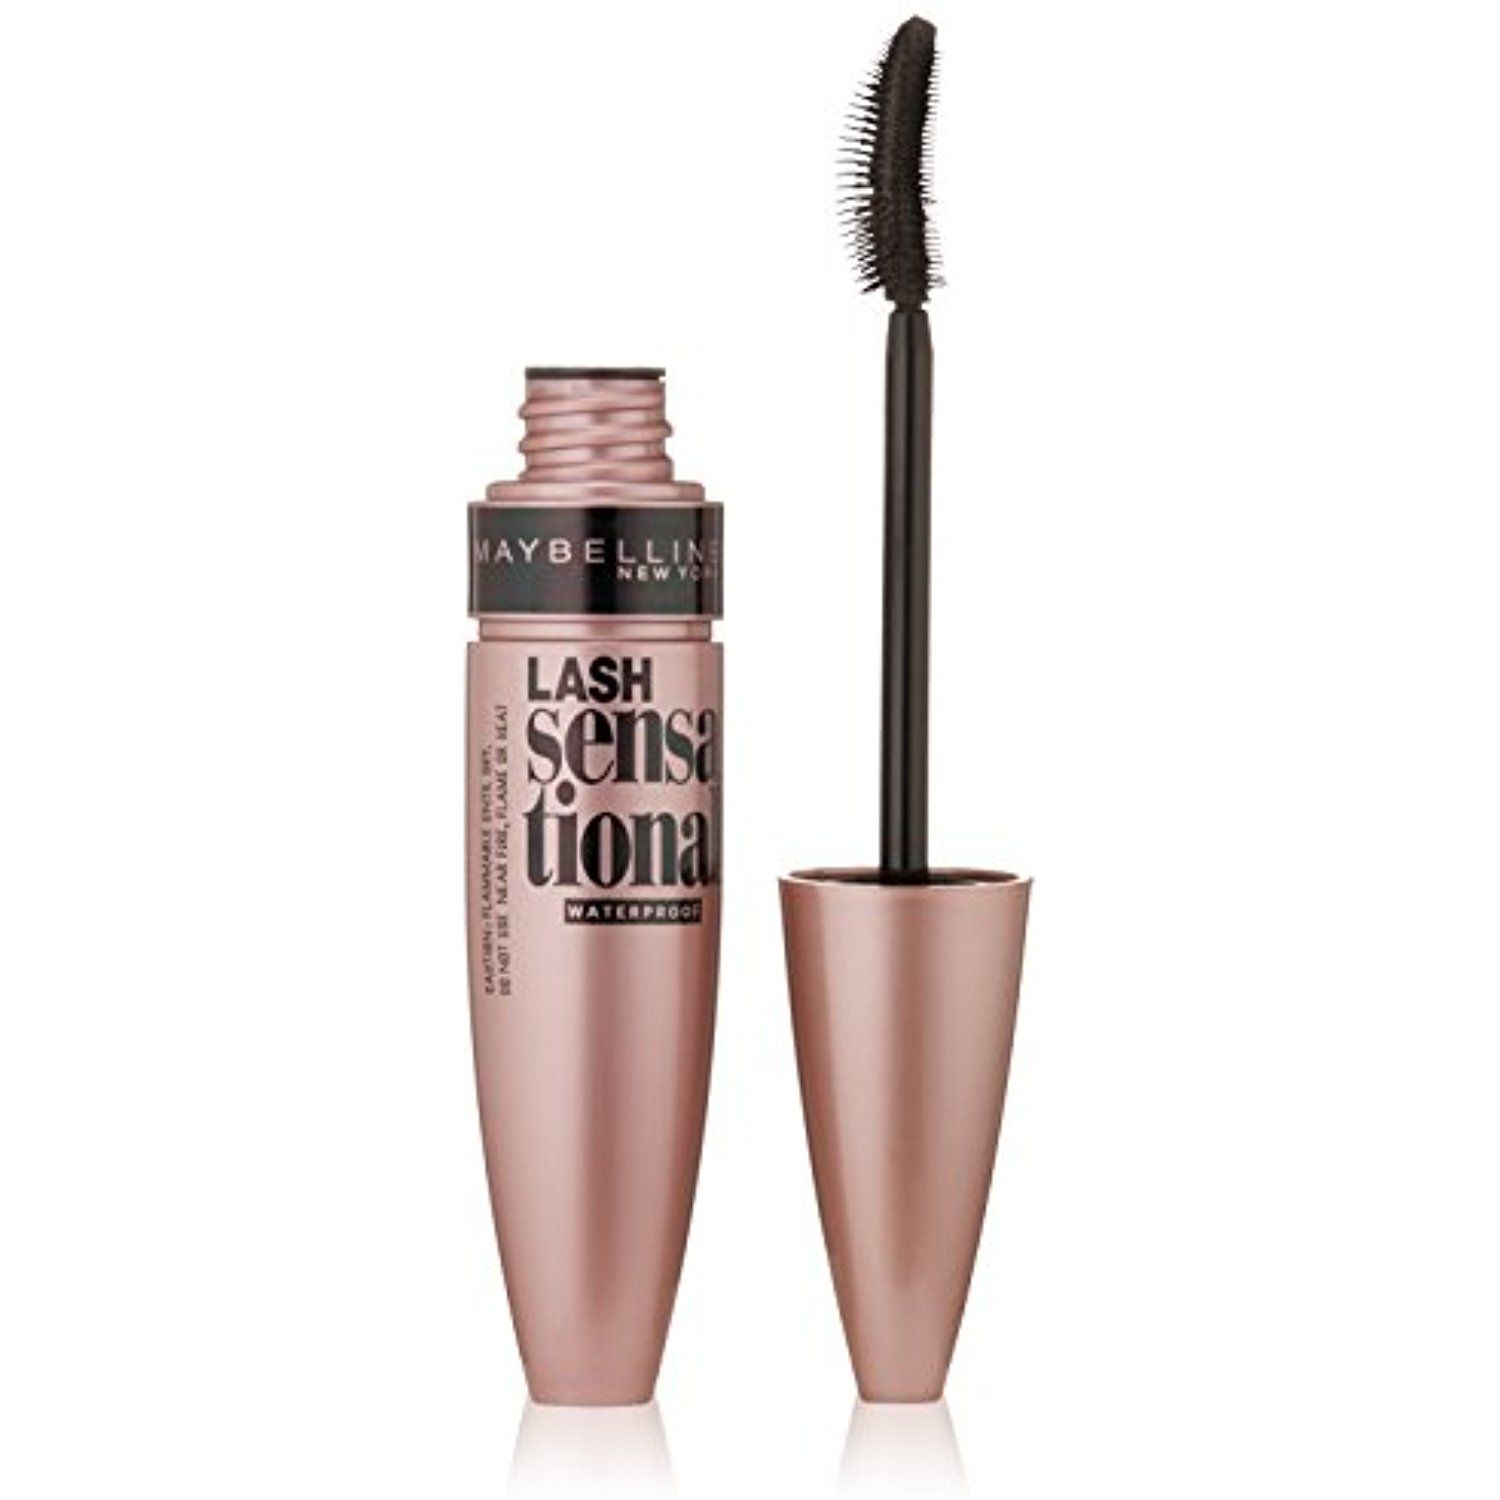 Maybelline New York Lash Sensational Mascara - Know Best 10 Mascaras in 2018 for Length & Volume with Reviews & Price